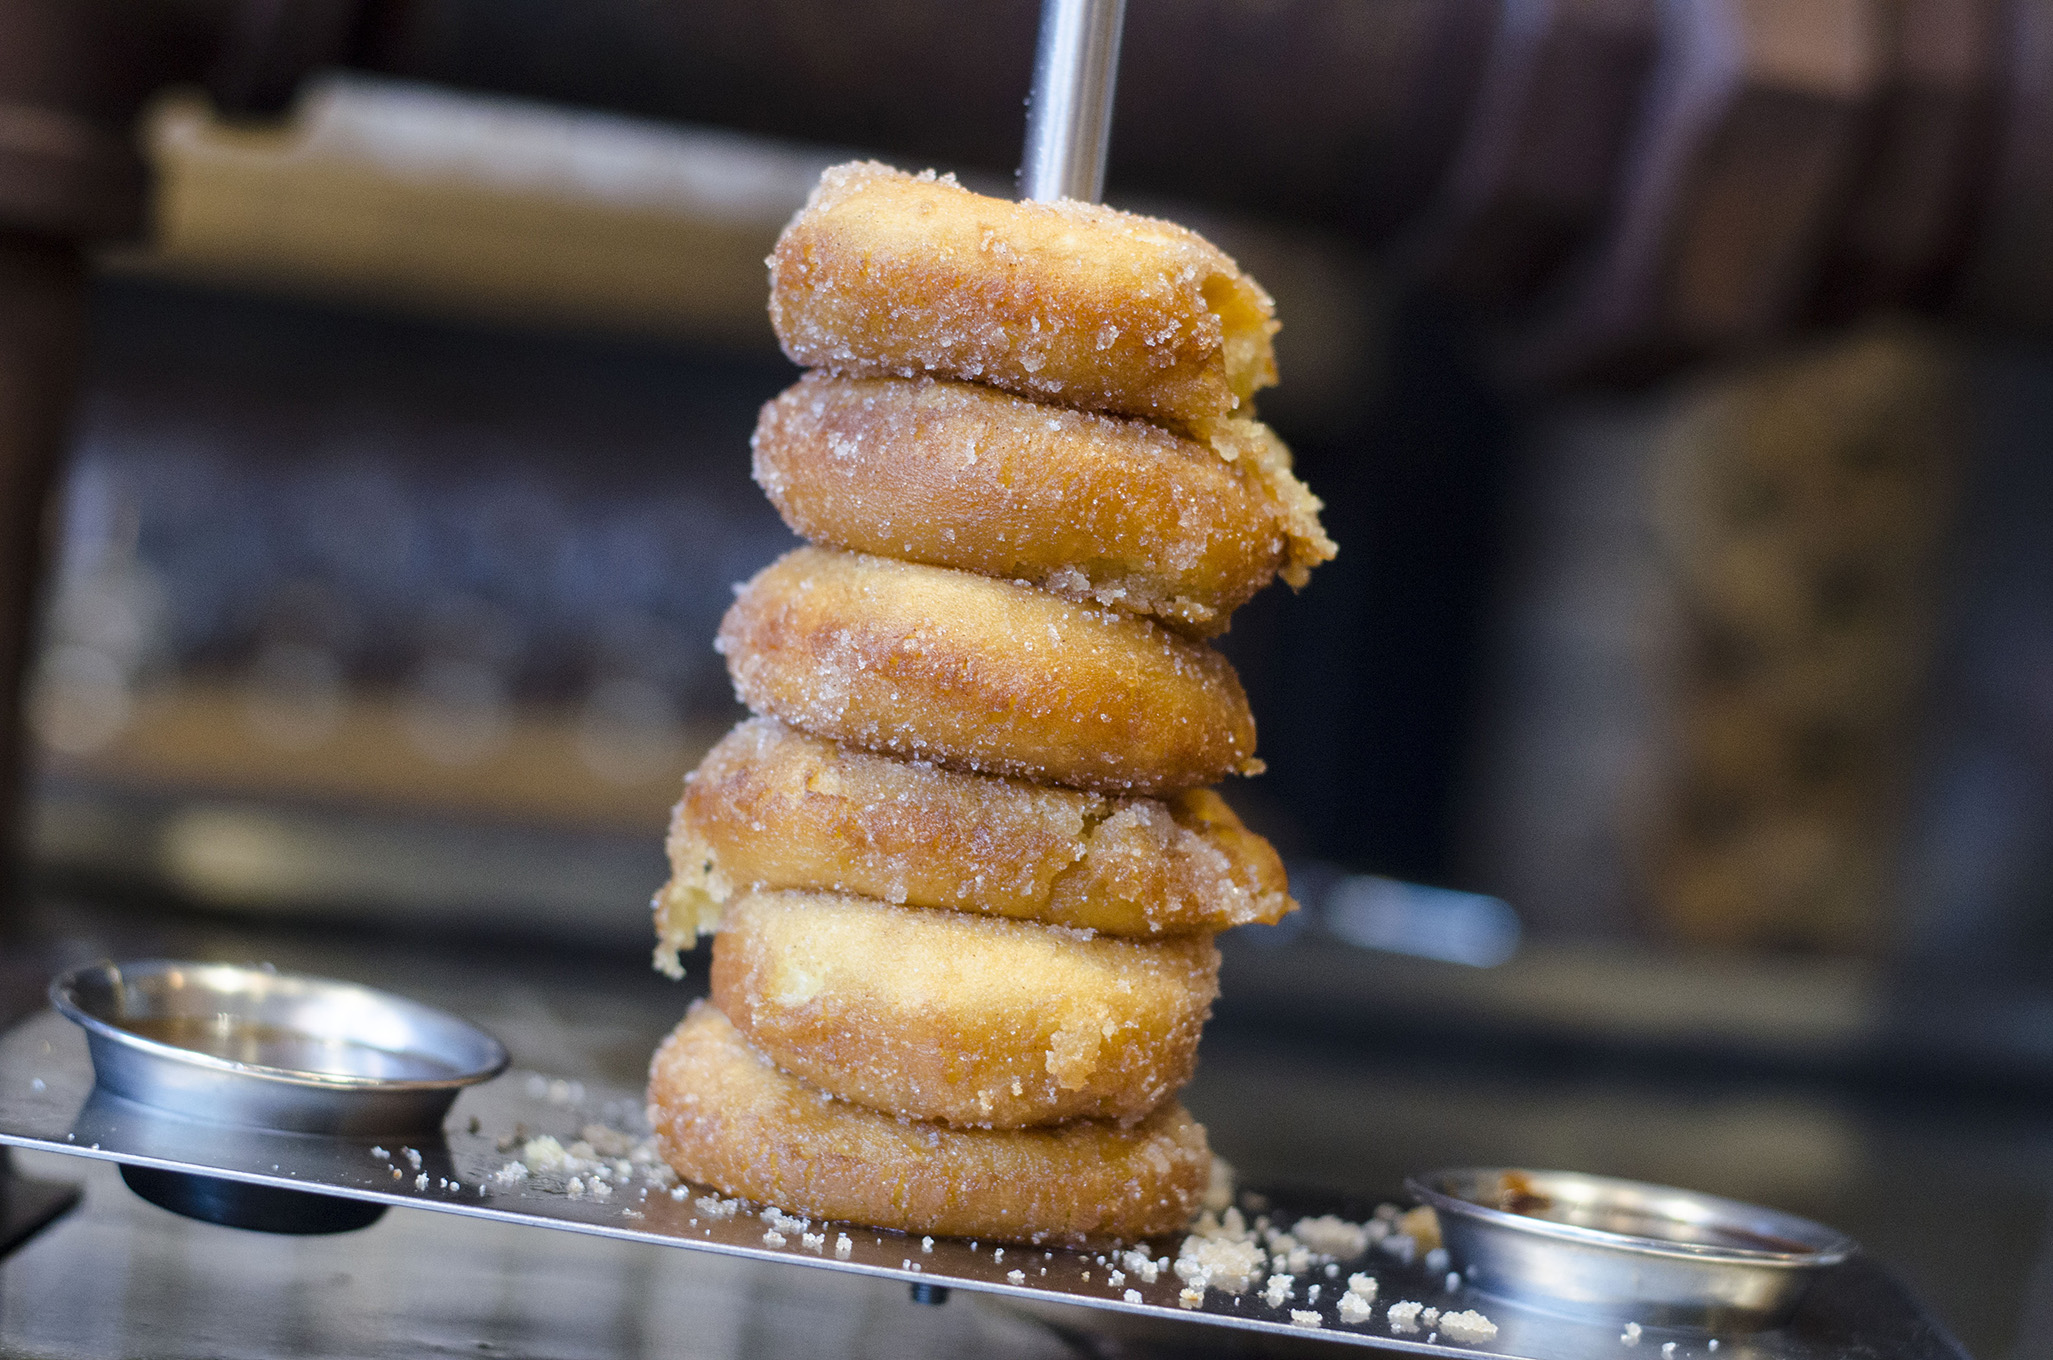 Colasanti Donut Tower from The Grove Brew House in Kingsville, Ontario.